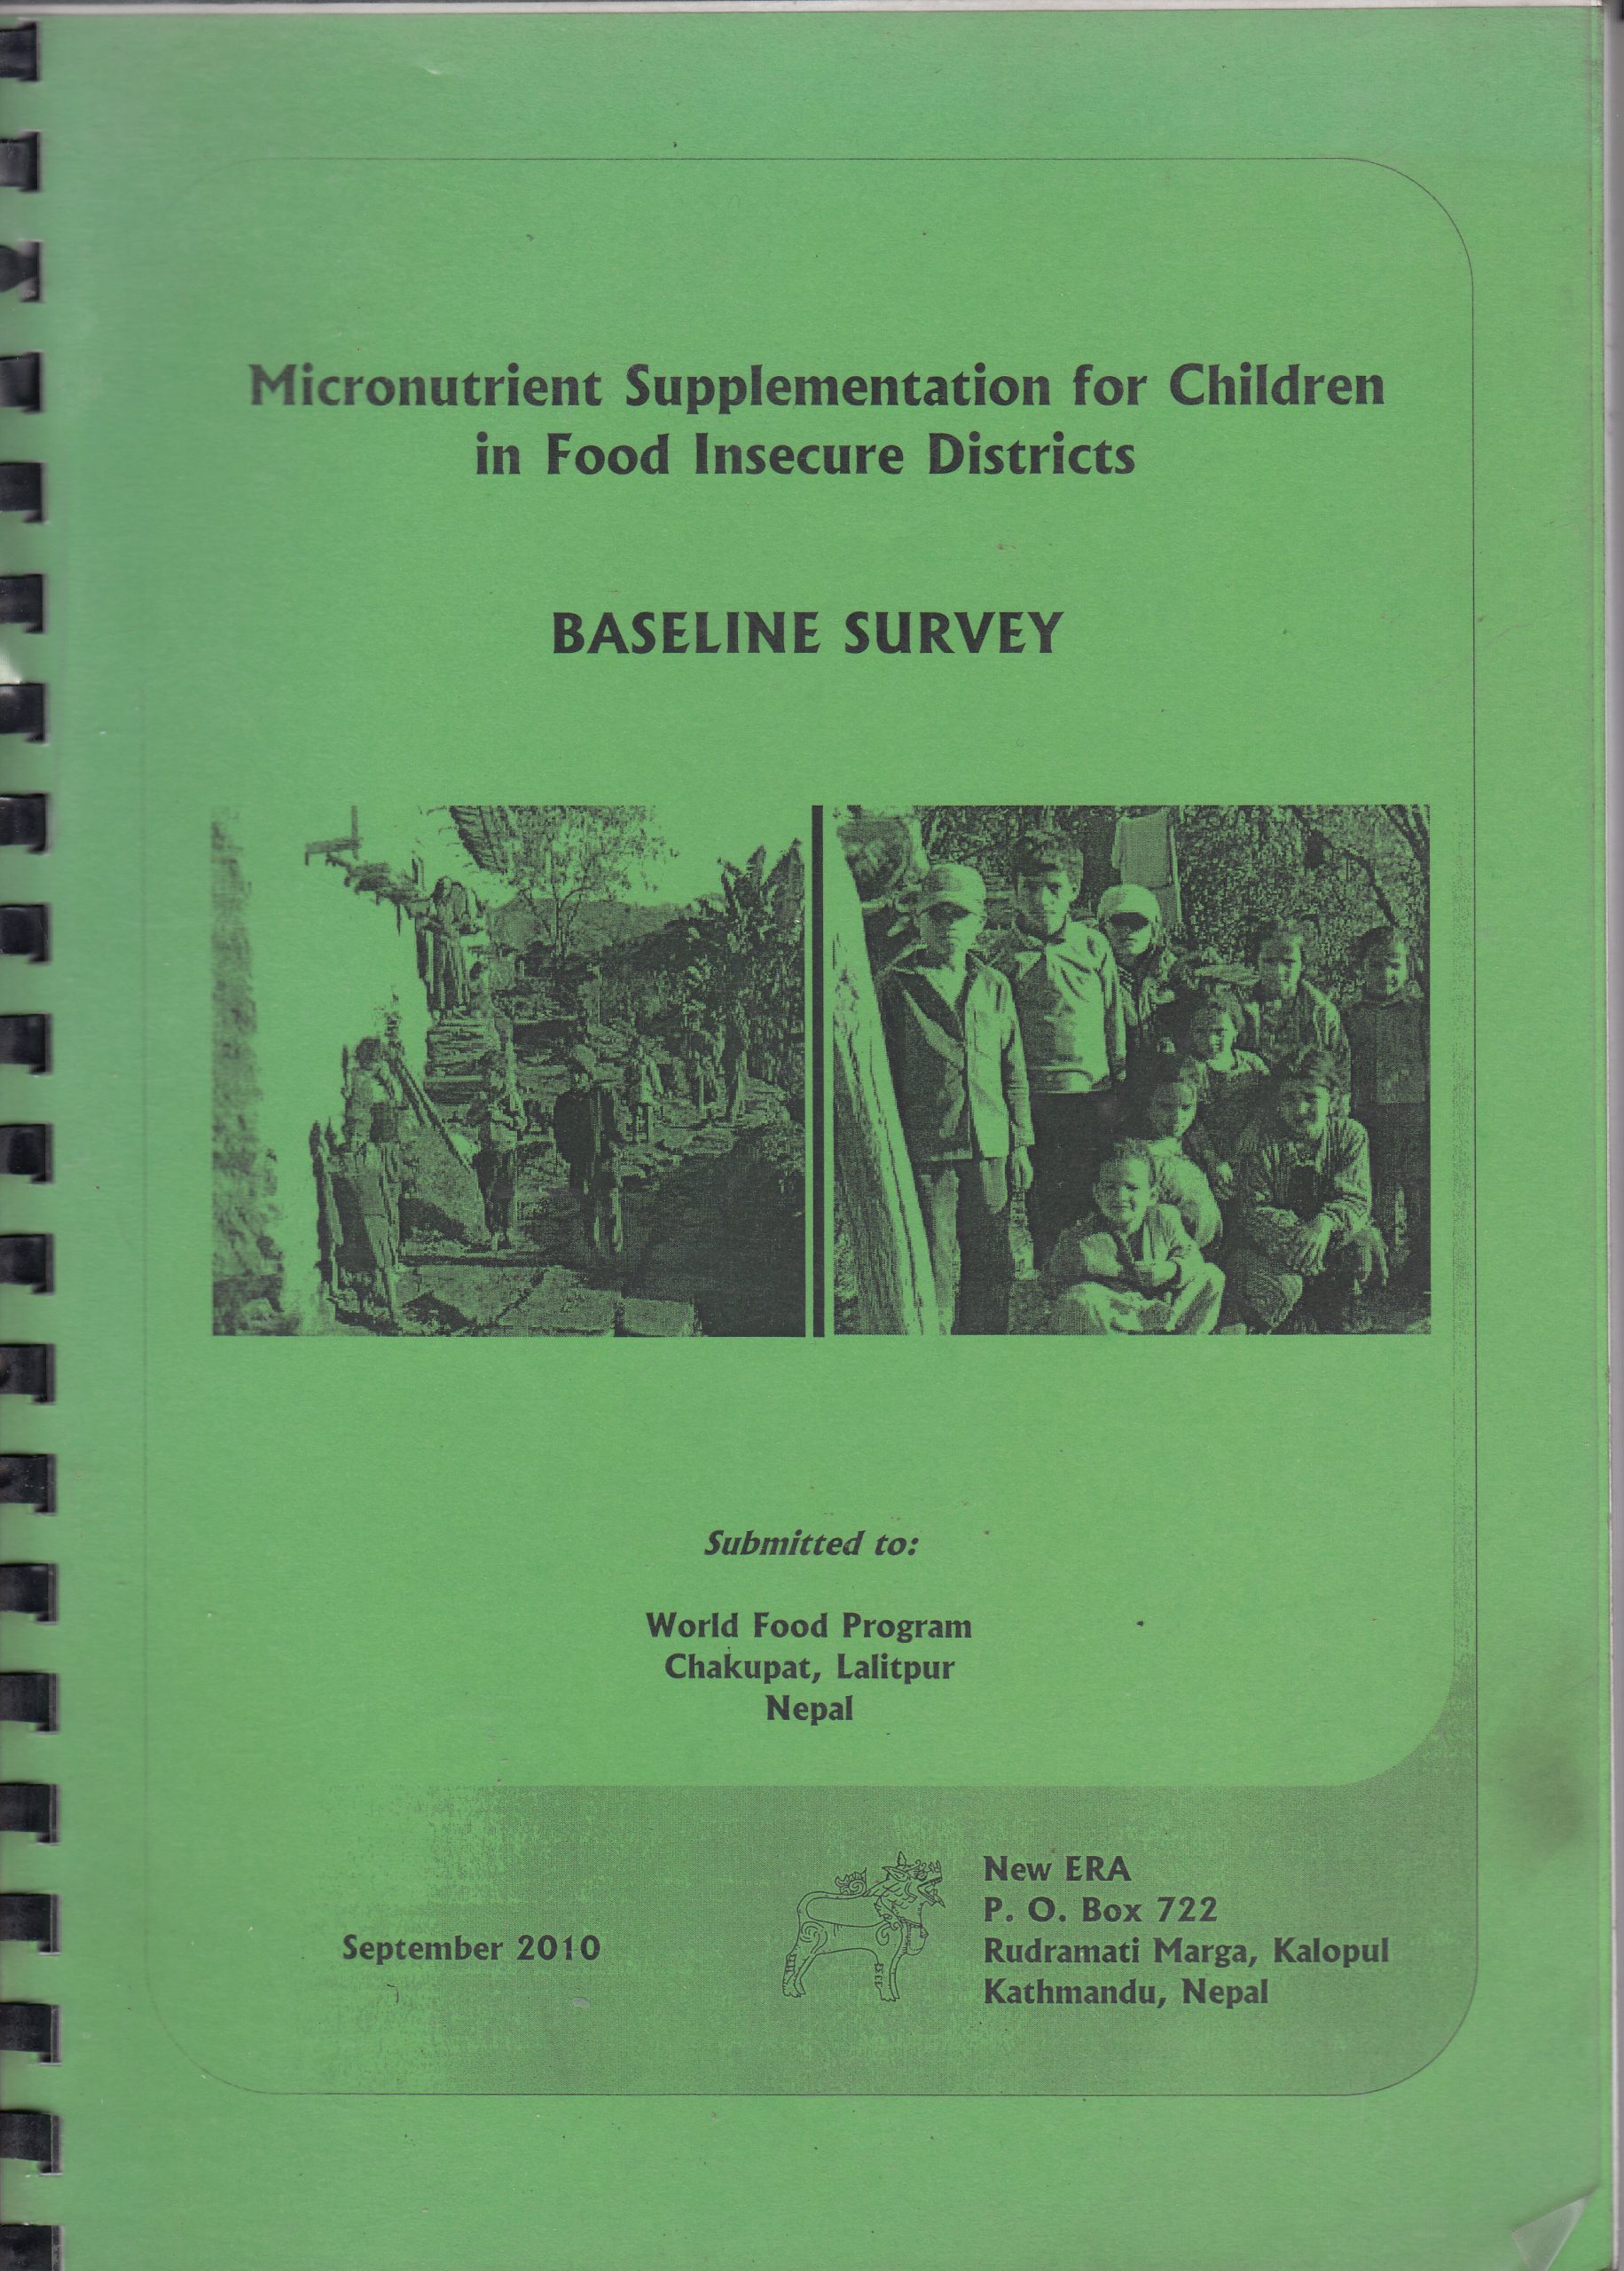 Micronutrient Supplementation for Children in Food Insecure Districts – Baseline Survey